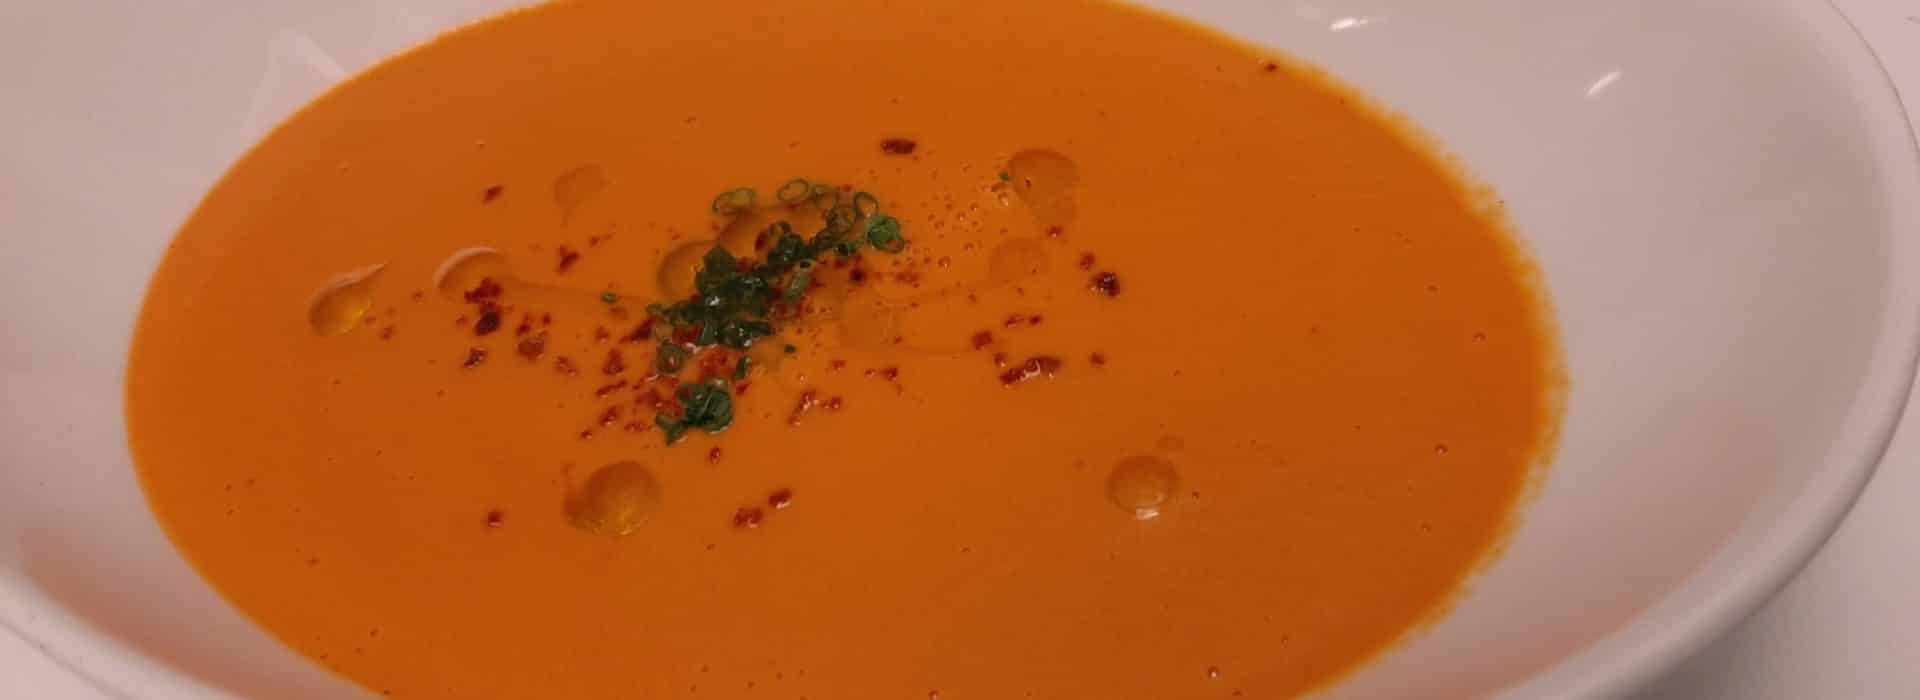 a white bowl filled with Tomato bisque soup sprinkled with sliced chives and drizzled with olive oil|heirloom tomatoes piled high|Best tomato bisque soup recipe|tomatoes of various shapes